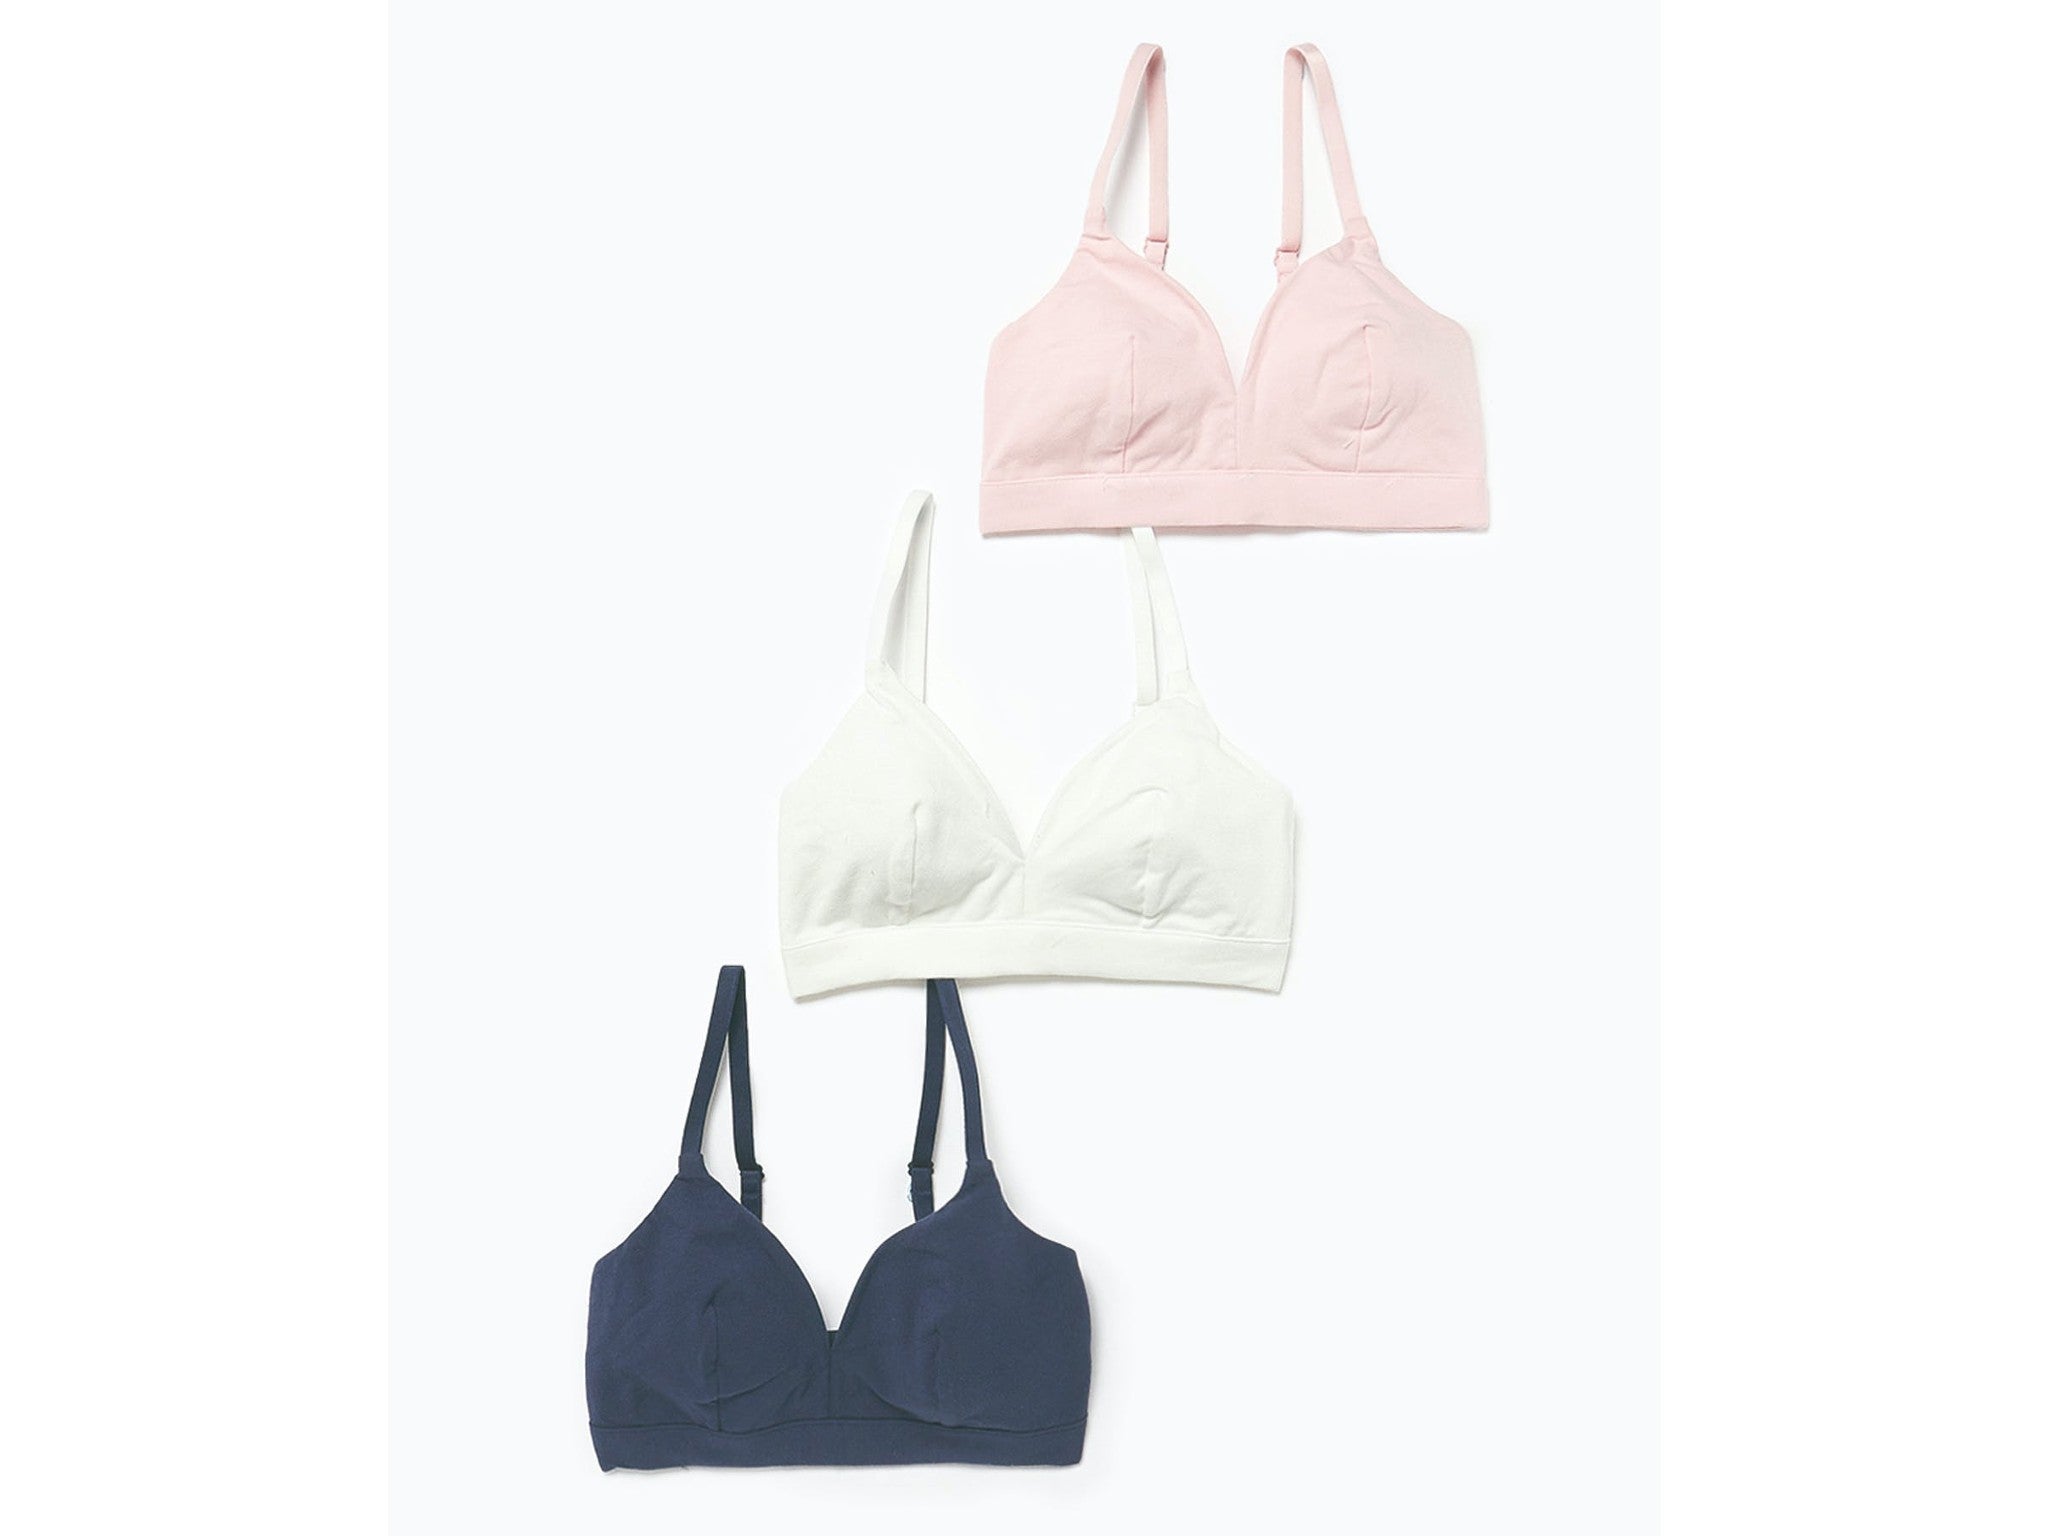 Non Wired Bras, Lounge Bras, Comfortable Bras